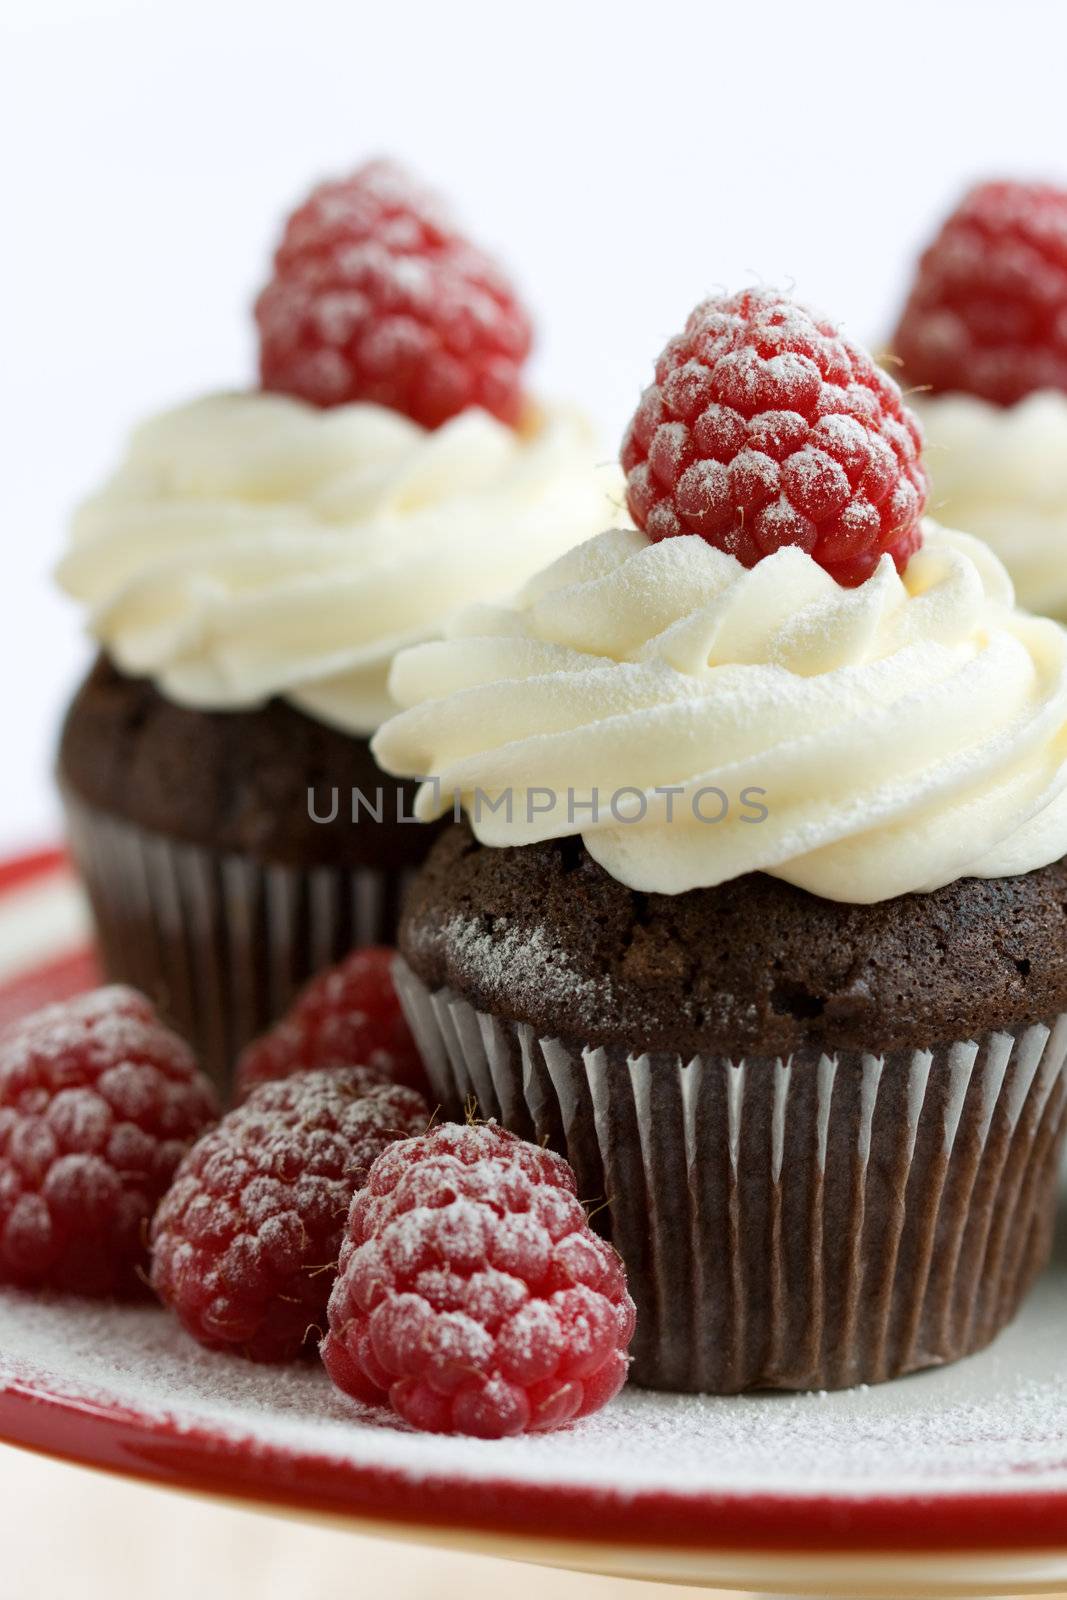 Chocolate cupcakes decorated with fresh cream, raspberries and a dusting of icing sugar